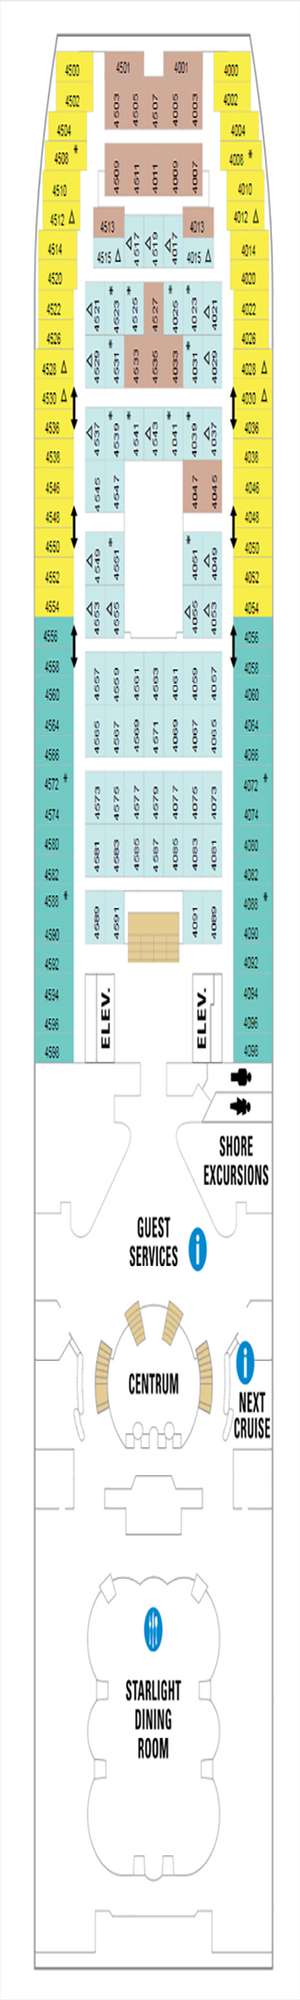 Deck plan for Majesty of the Seas